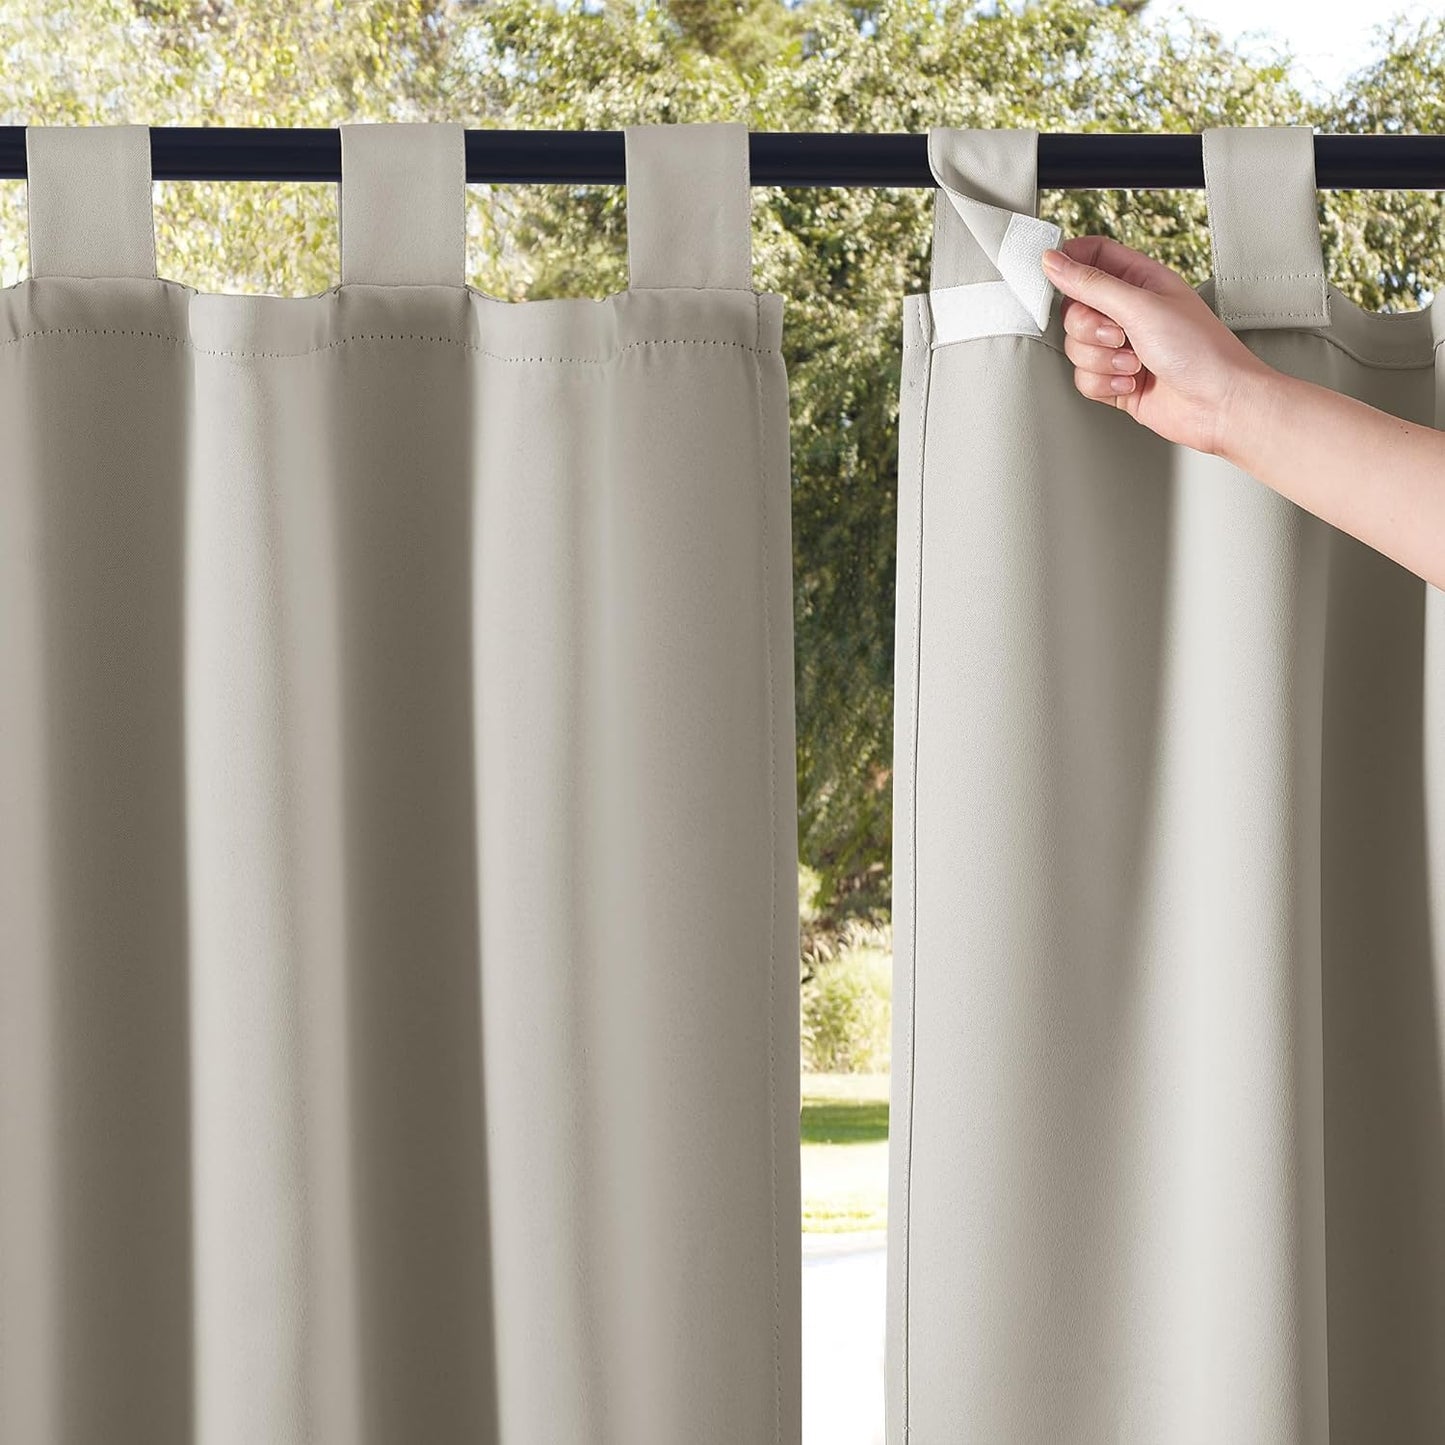 NICETOWN 2 Panels Outdoor Patio Curtainss Waterproof Room Darkening Drapes, Detachable Sticky Tab Top Thermal Insulated Privacy Outdoor Dividers for Porch/Doorway, Biscotti Beige, W52 X L84  NICETOWN Natural W52 X L108 